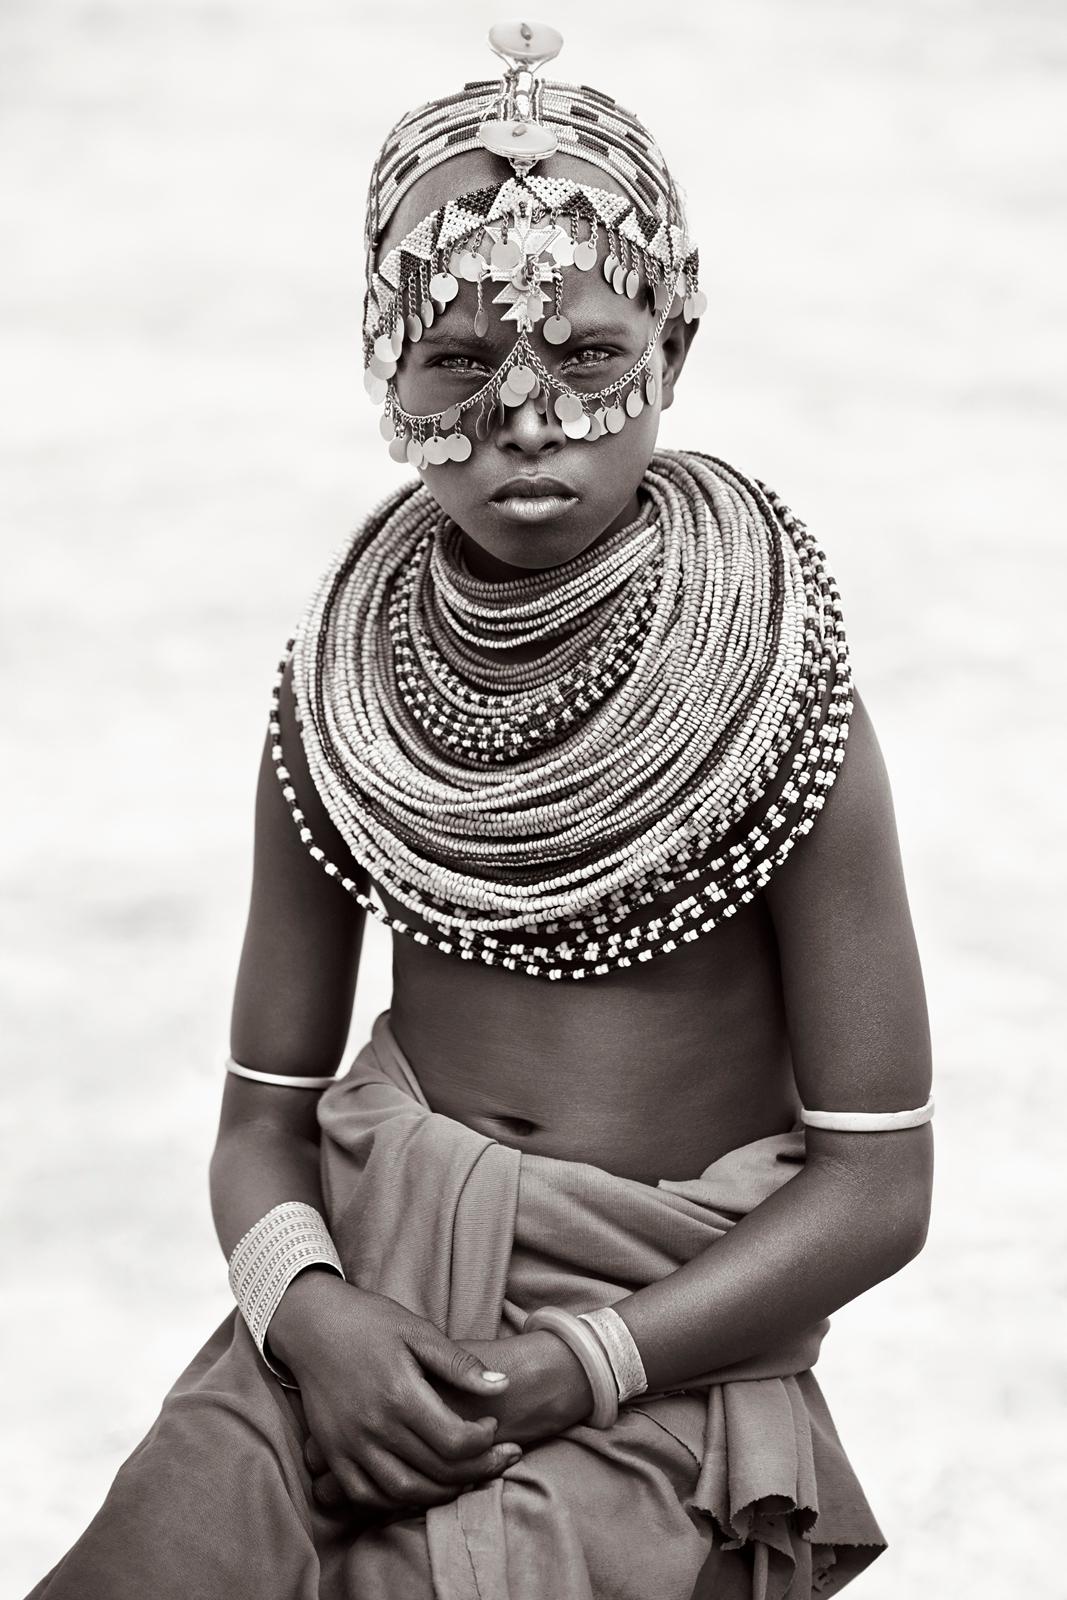 Drew Doggett Portrait Photograph - Portrait of a Young Woman in East Kenya, Iconic, Empowerment, Fashion